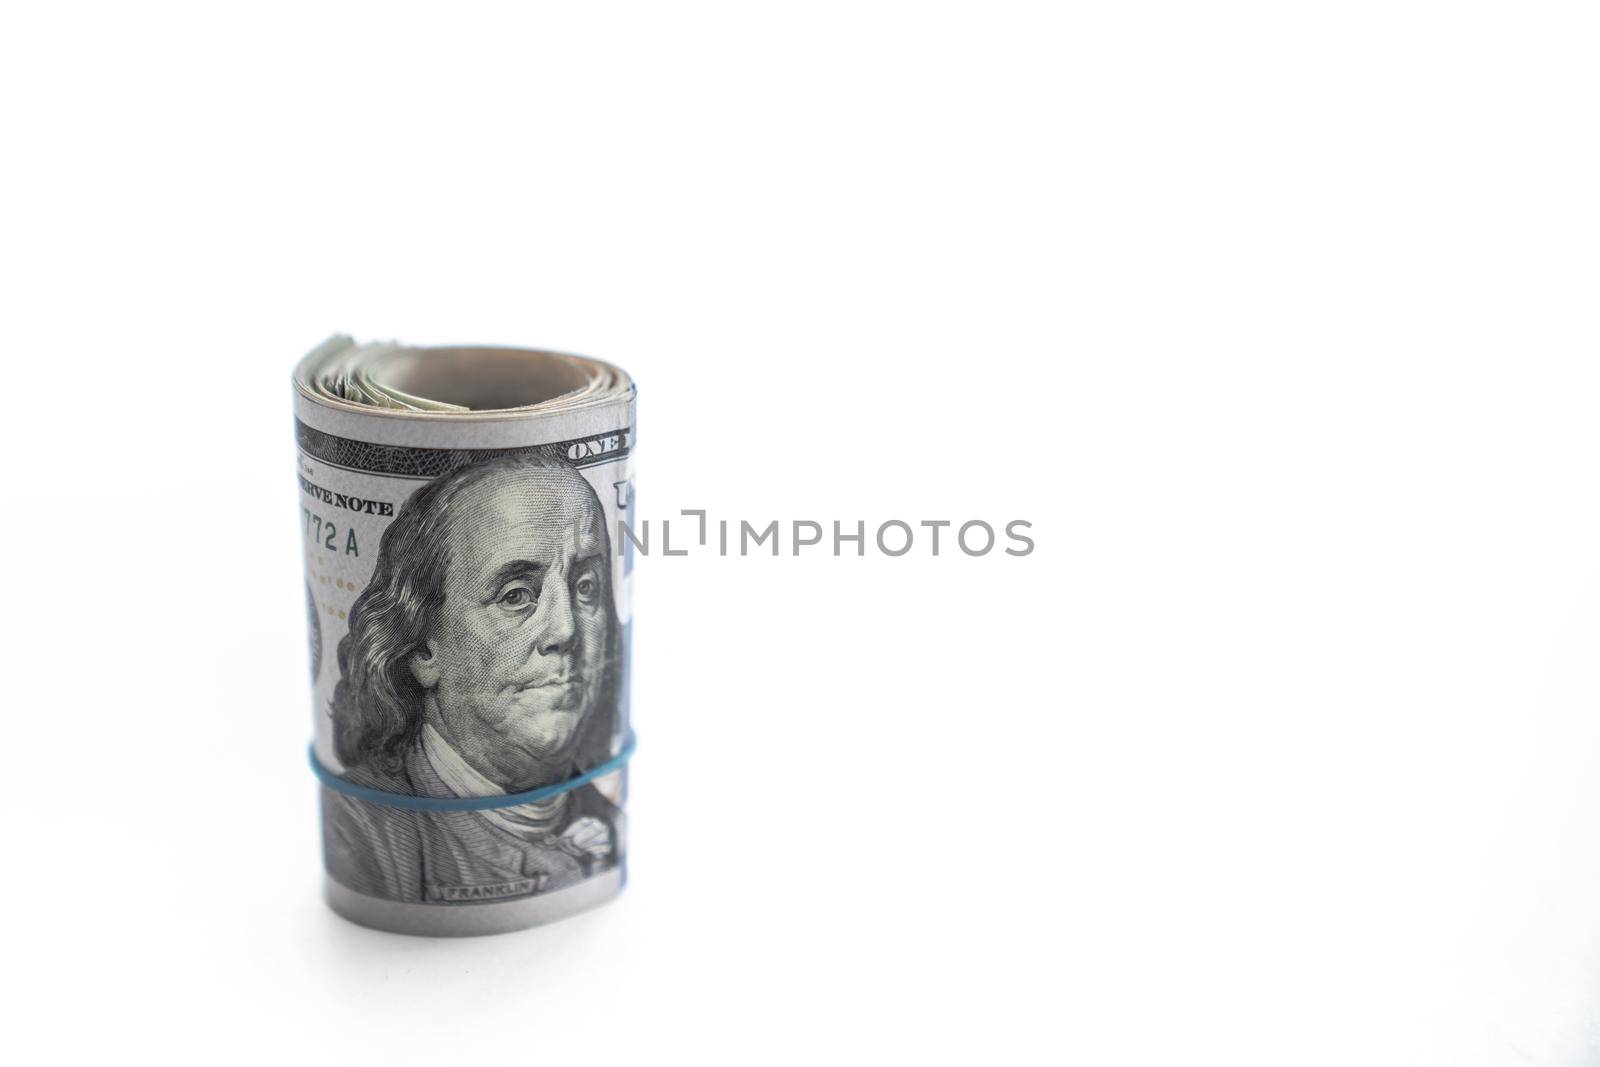 A wad of money is rolled up with a Benjamin or United States hundred dollar bill on the top standing on edge with a blue rubber band isolated on a white background with copy space.